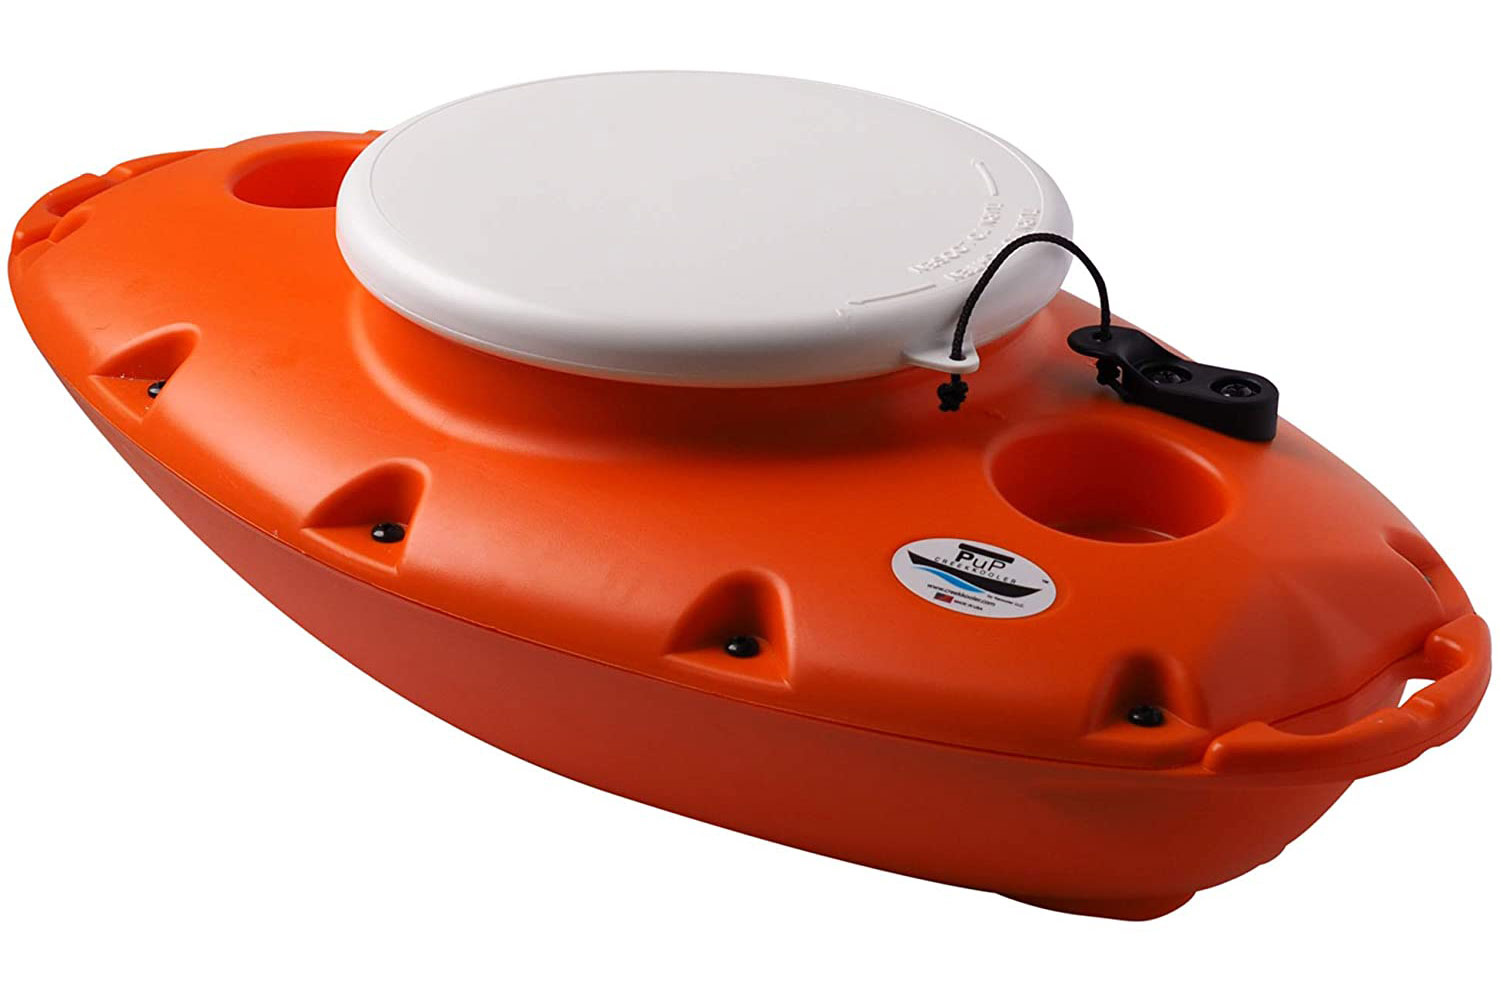 The Big Bobber Floating Cooler boating/fishing/pool Party Holds 12